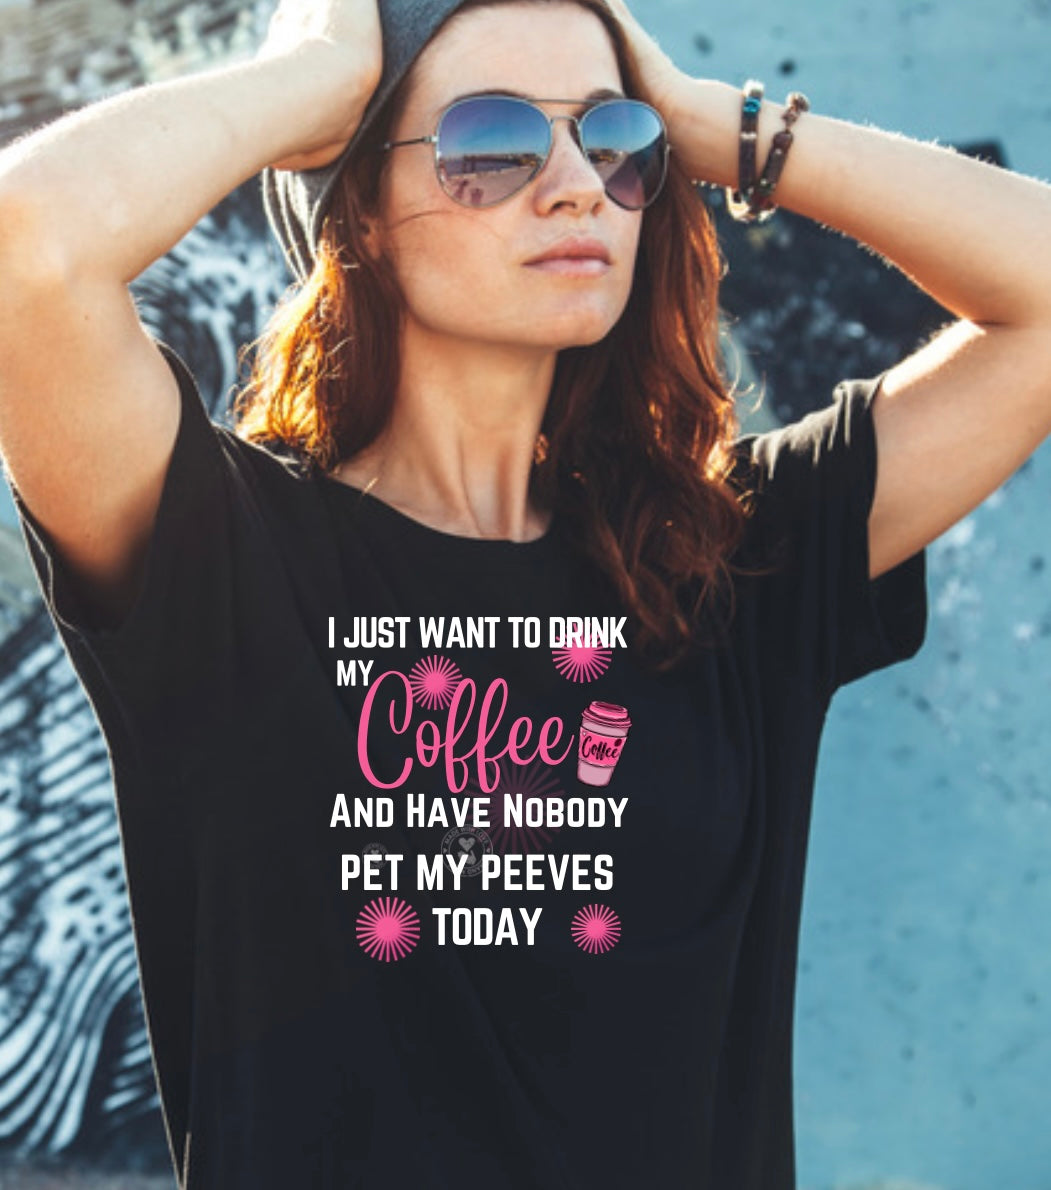 I just want to drink my coffee | Pet my peeves tee